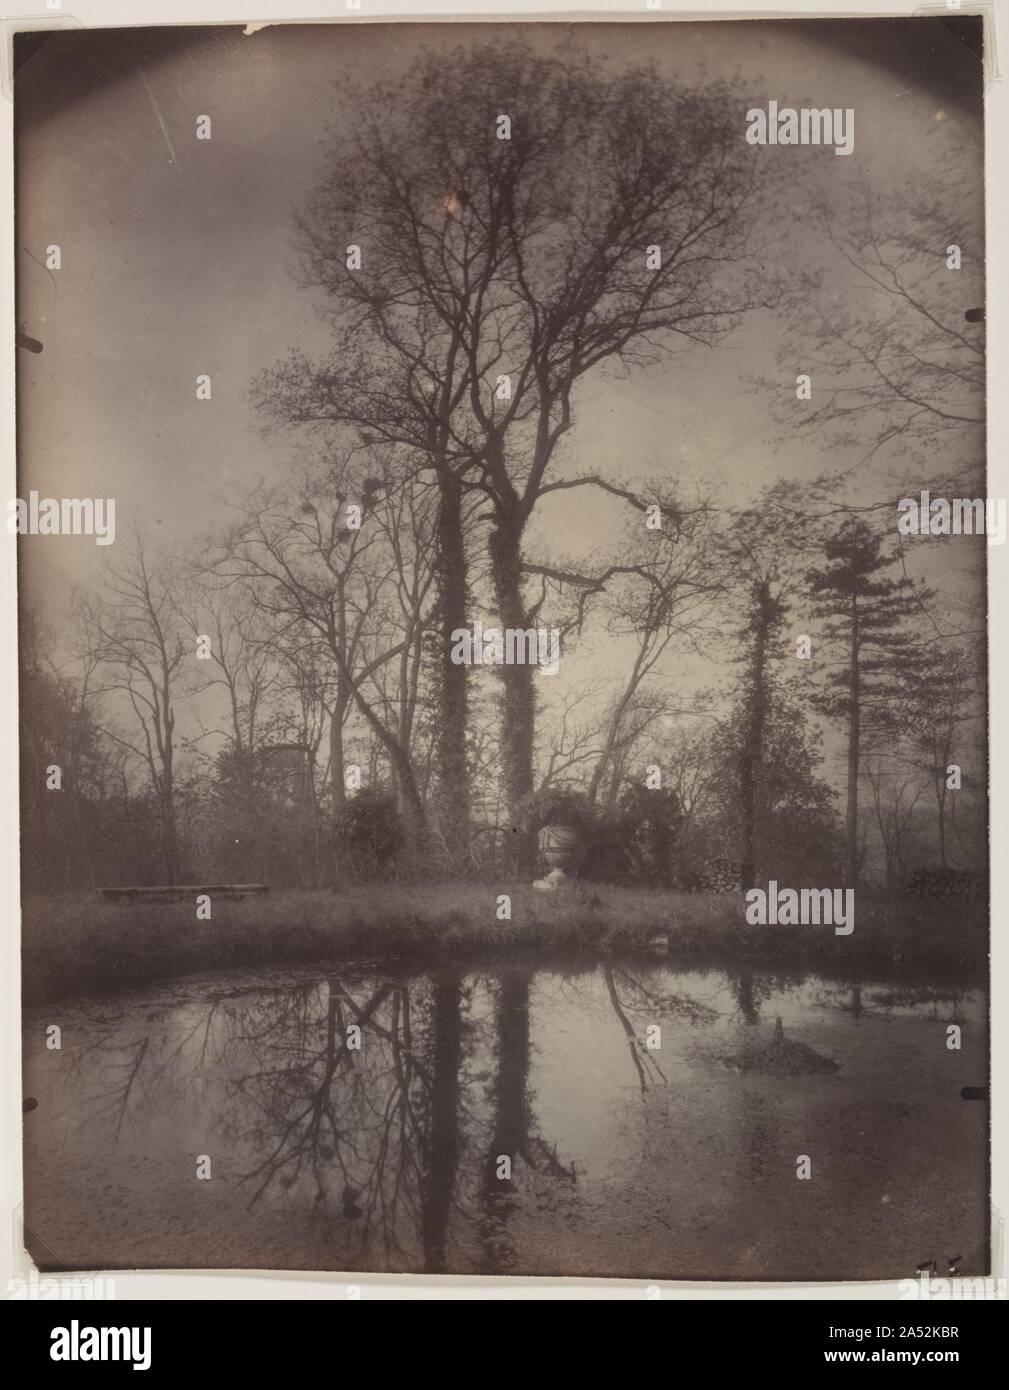 The Park at Sceaux [April 1925, 7a.m.], 1925. After the turn of the 20th century, Atget began to photograph many of the magnificent ch&#xe2;teaux and parks surrounding Paris. This photograph is from a series taken of the abandoned estate and garden at Sceaux in 1925 and is considered his rarest and finest. It records that fleeting moment when a tree's sculptural form and the beginning stubble of its spring foliage are both visible. Shooting directly into early morning light, Atget captured the stately trees casting long, shimmering reflections on the placid pond surface. By visually compressin Stock Photo